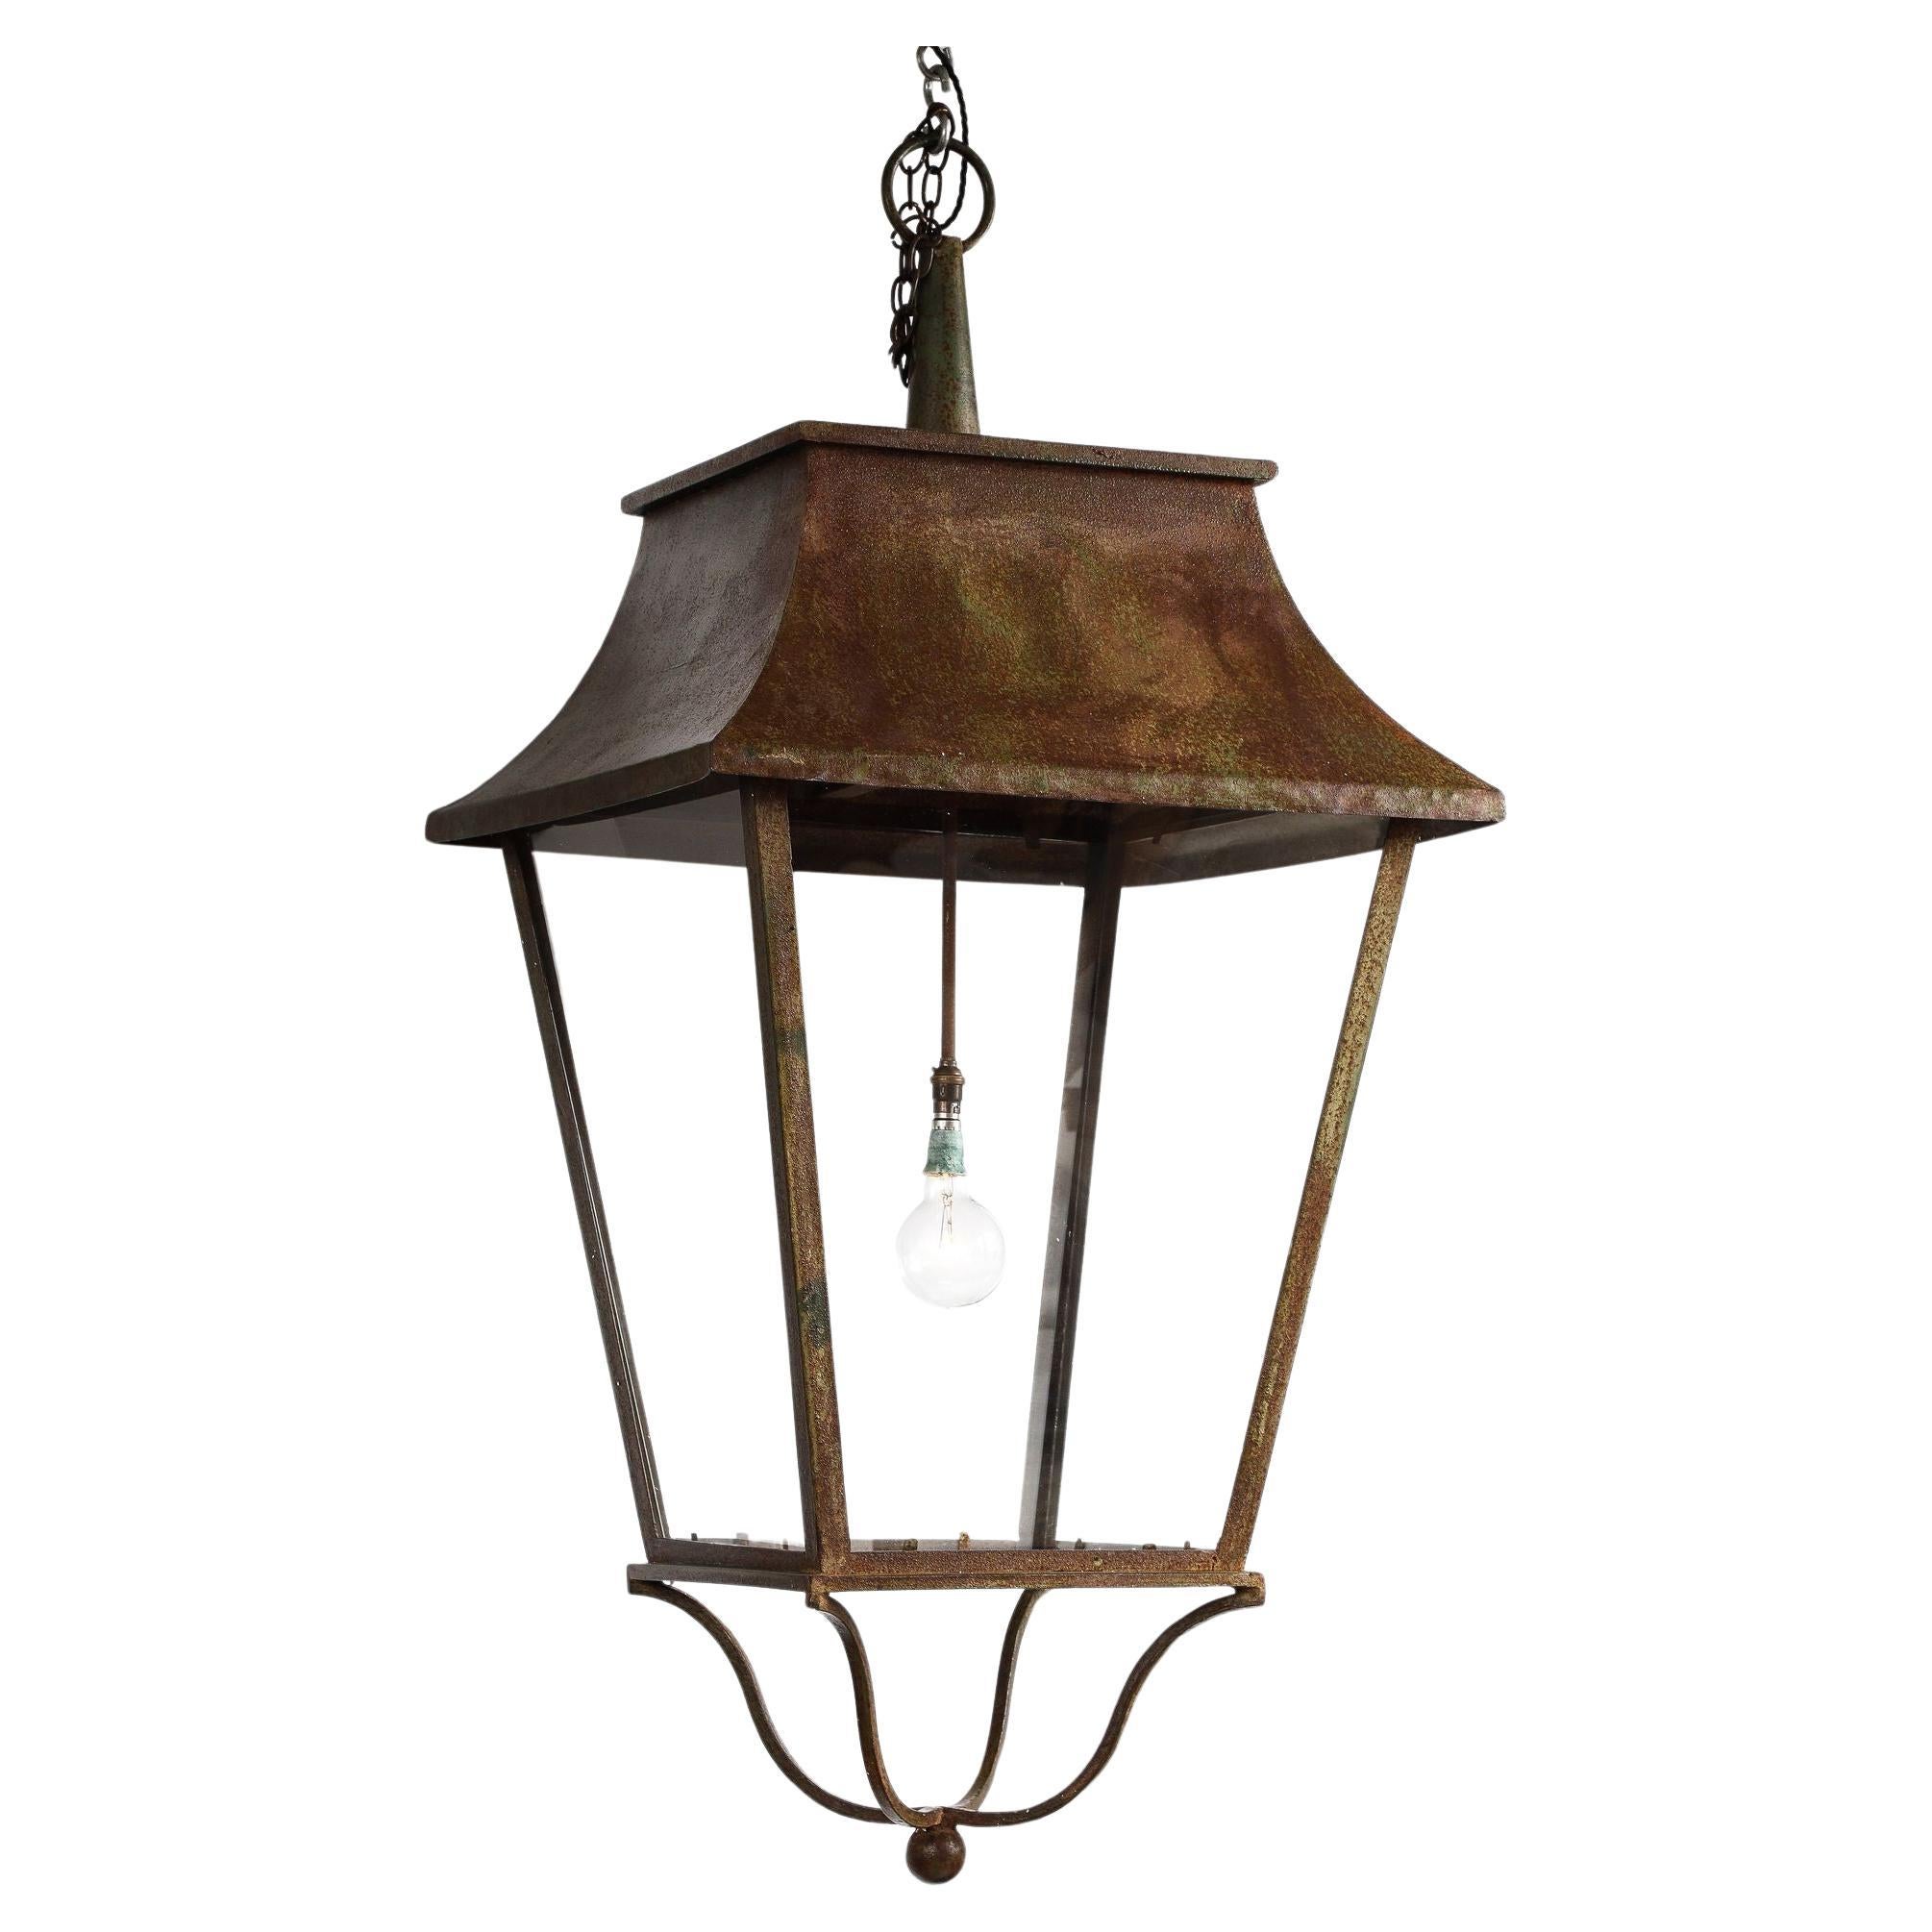 Overscale English Hall or Stable Lantern